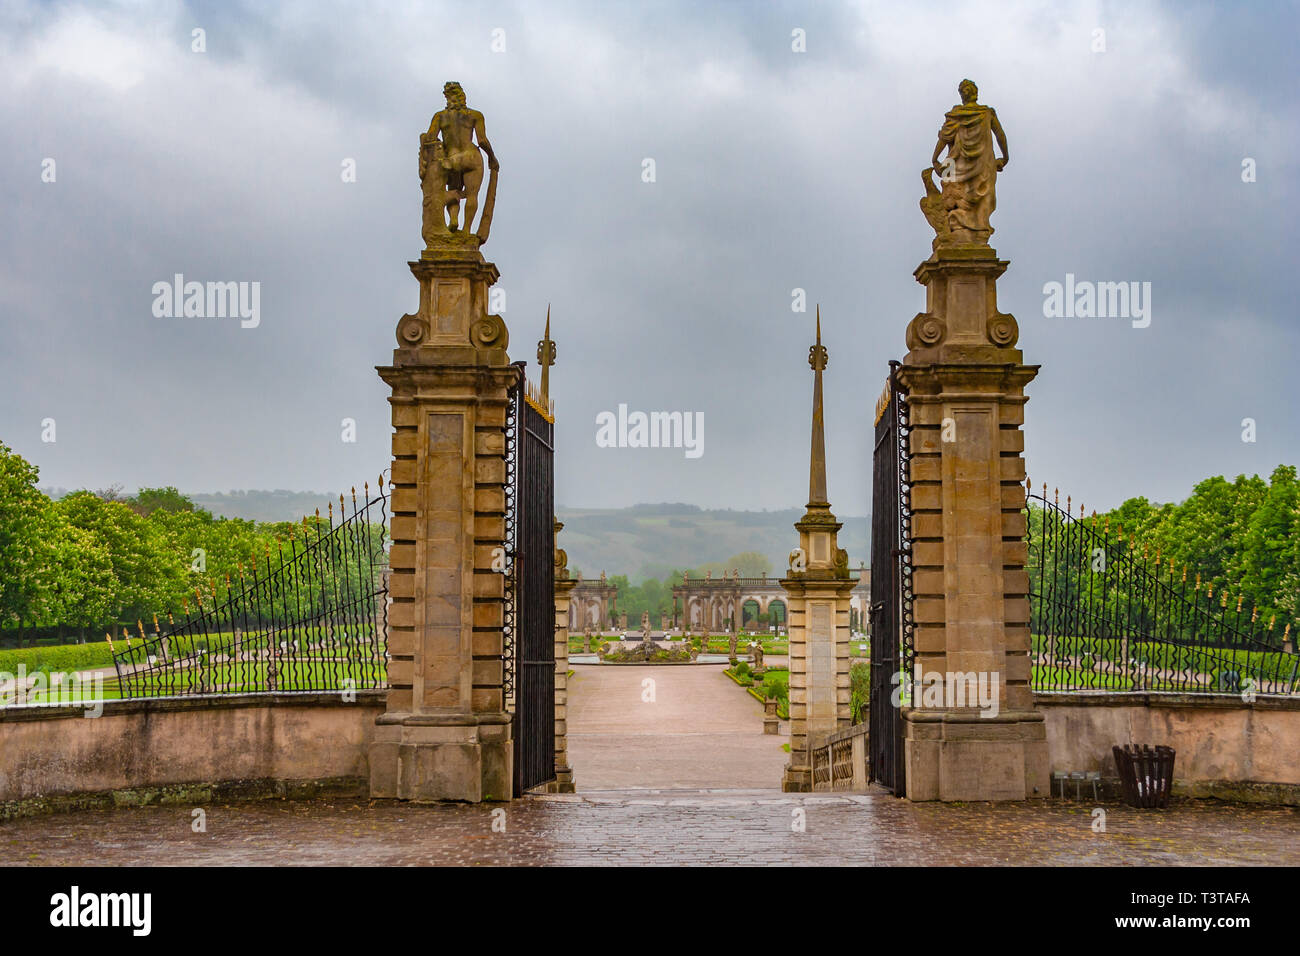 The grand open gated entrance with two statues to the Baroque garden from the famous Weikersheim Palace on a cloudy day in Germany. The walkway is... Stock Photo